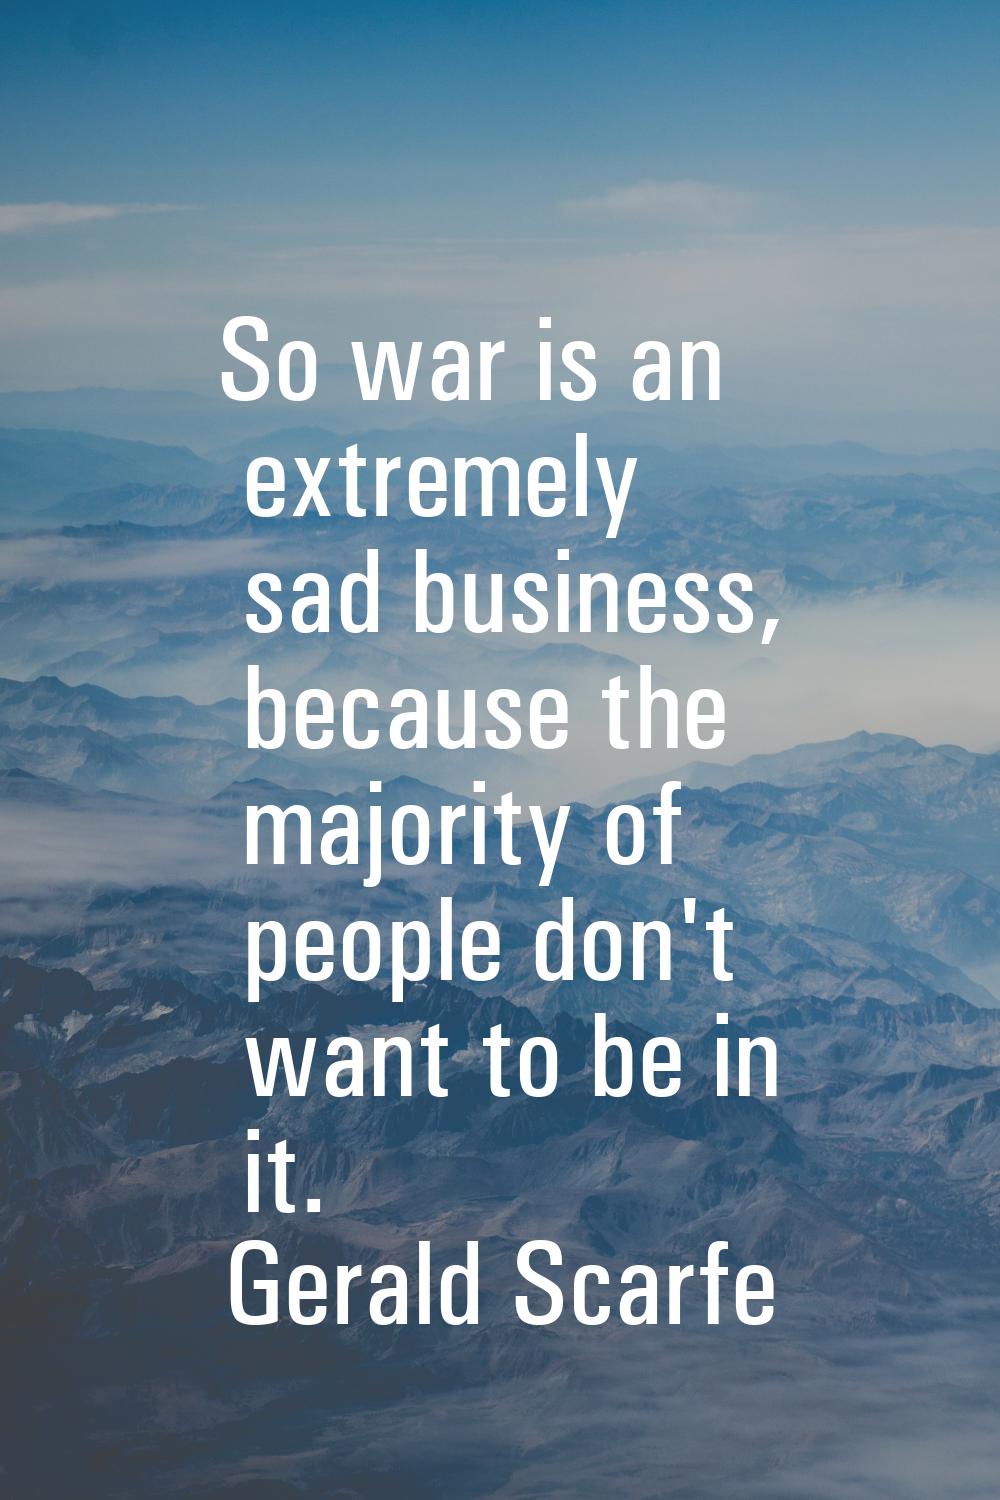 So war is an extremely sad business, because the majority of people don't want to be in it.